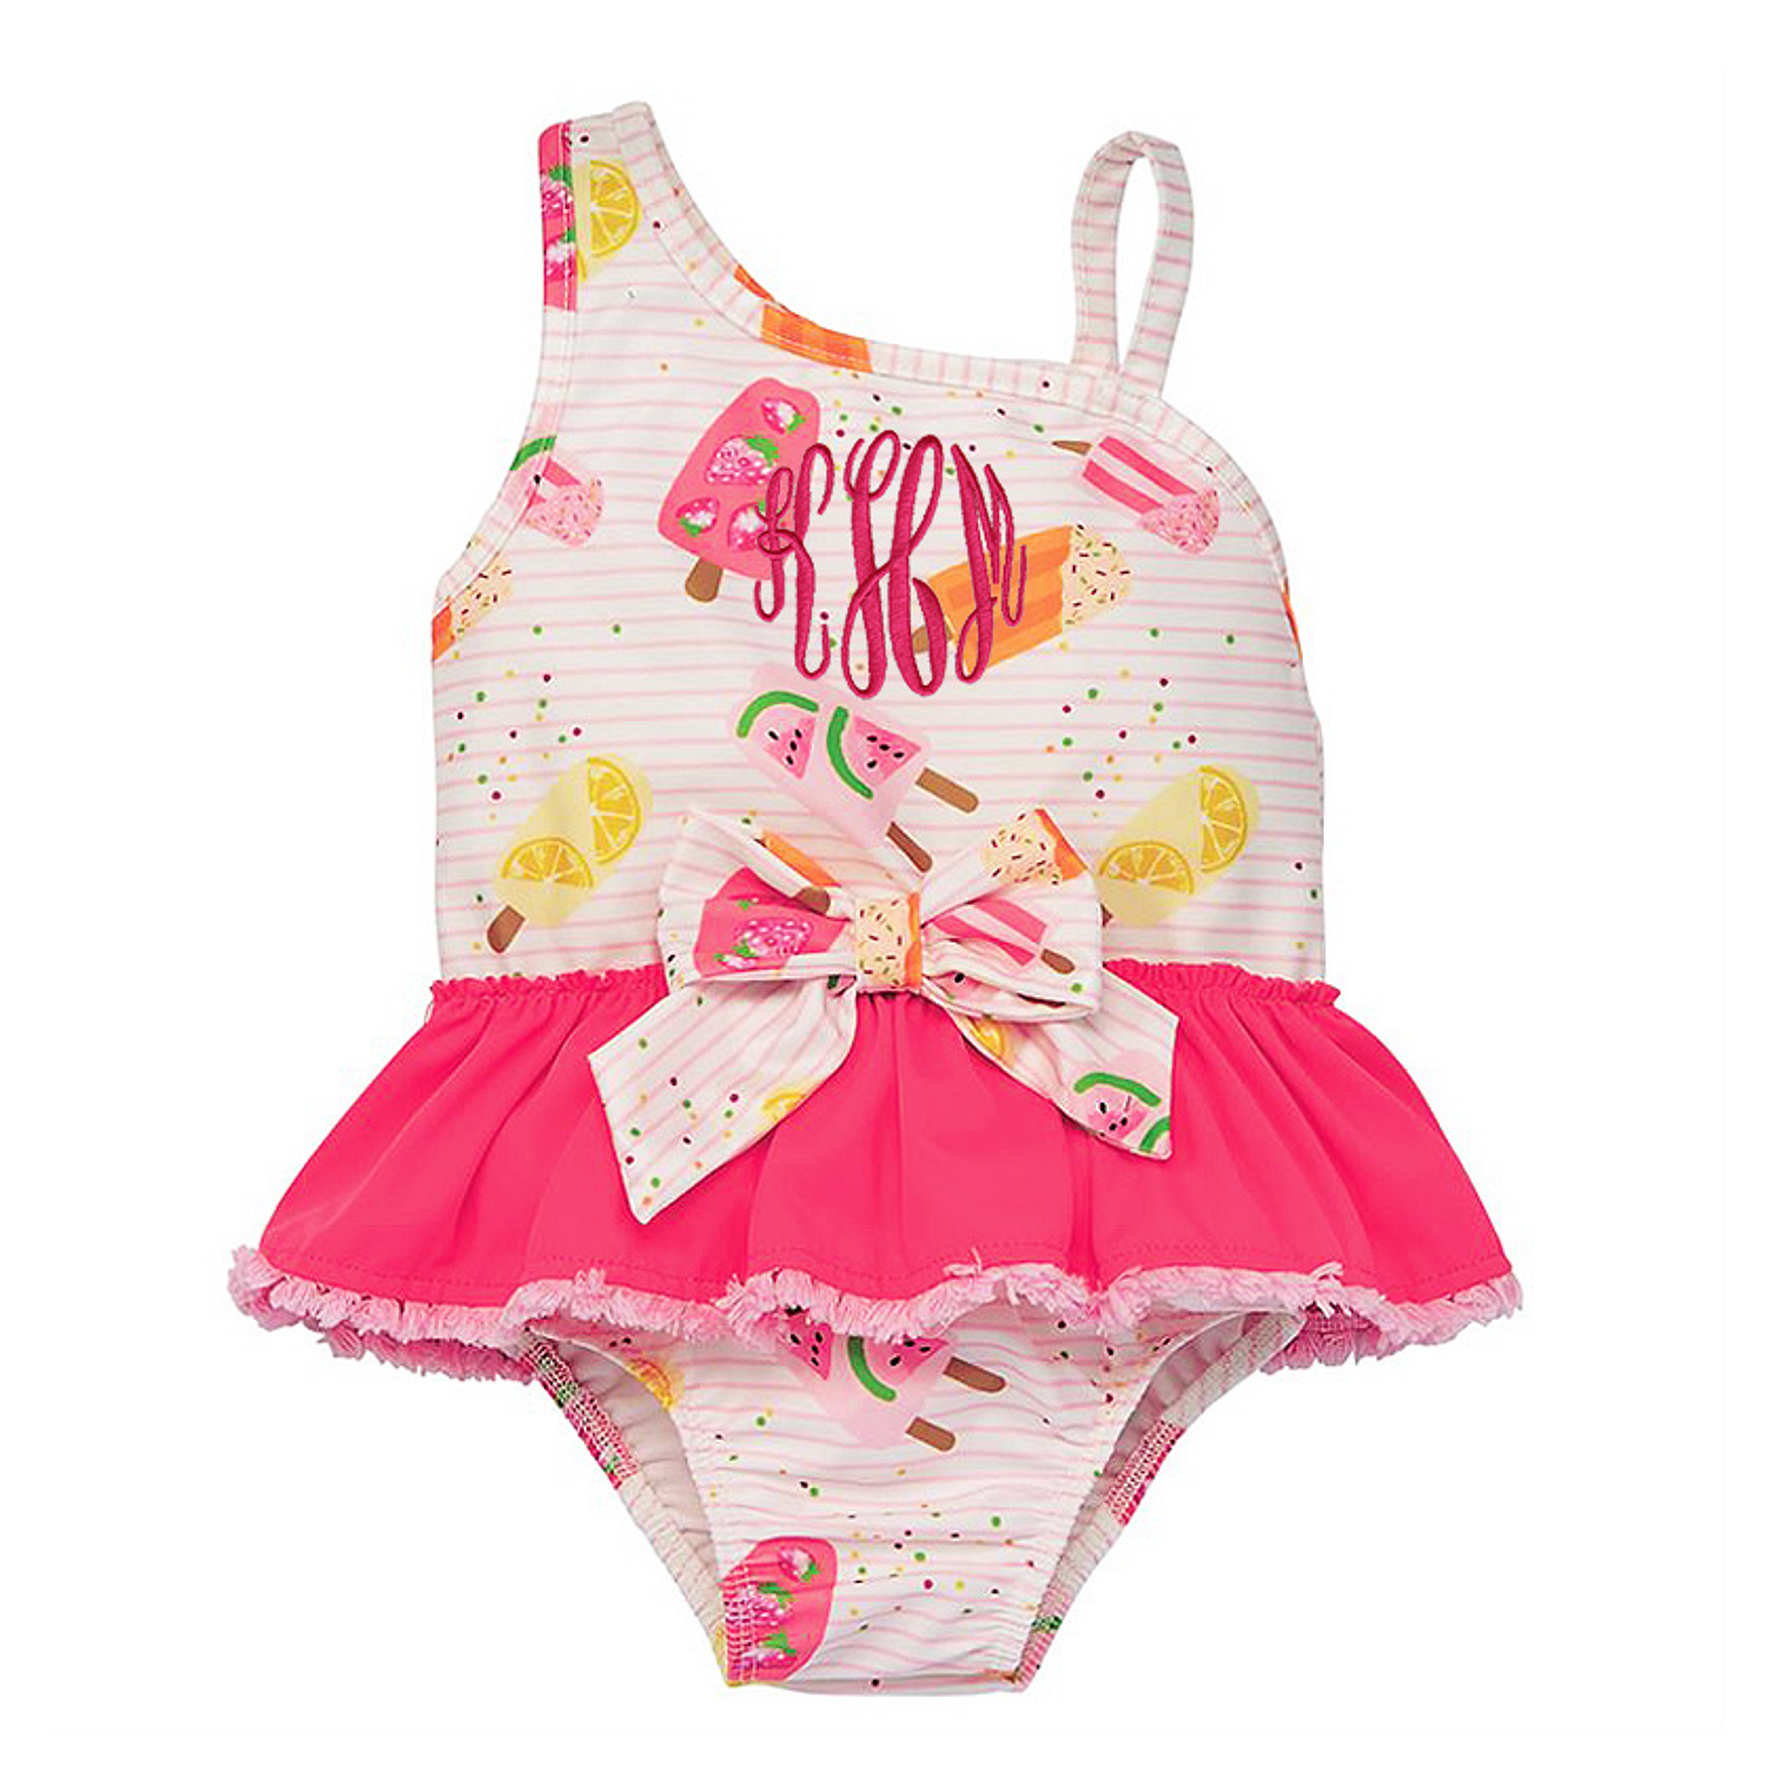 Kids Personalized Popsicle Swimsuit - Marleylilly Kids